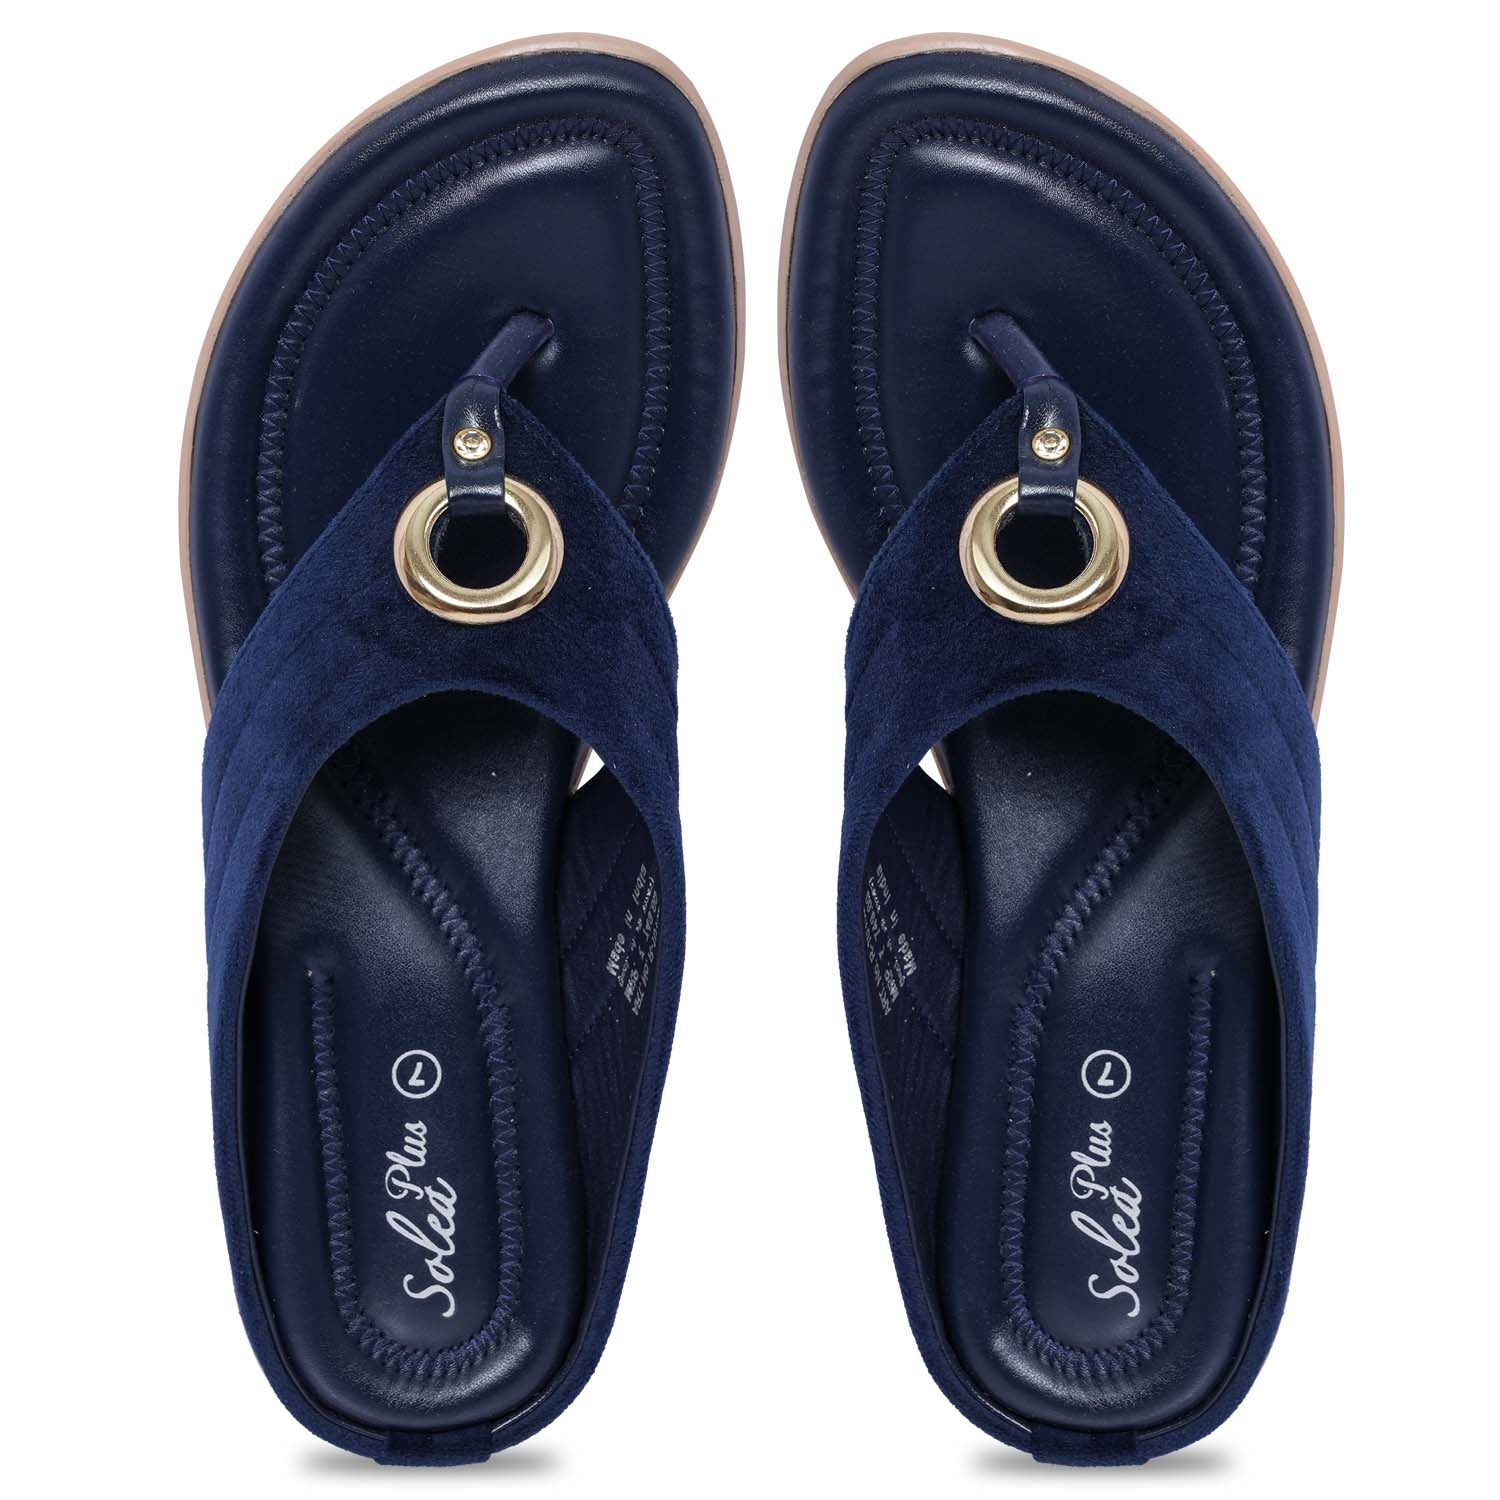 Paragon R1015L Women Sandals | Casual &amp; Formal Sandals | Stylish, Comfortable &amp; Durable | For Daily &amp; Occasion Wear